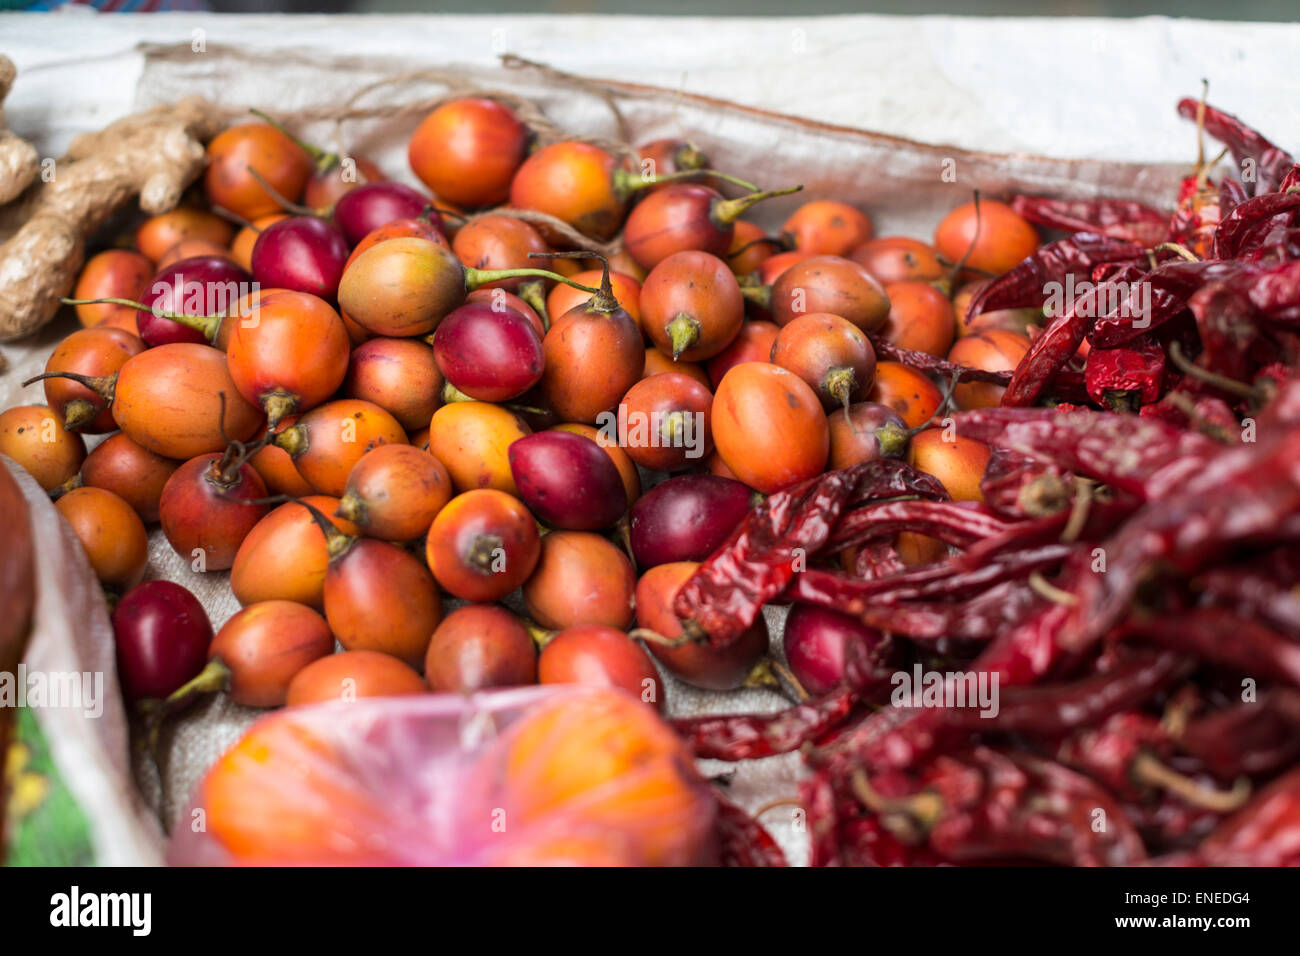 Yellow passion fruit and red chili peppers at weekend covered market in Thimphu, Bhutan, Asia Stock Photo